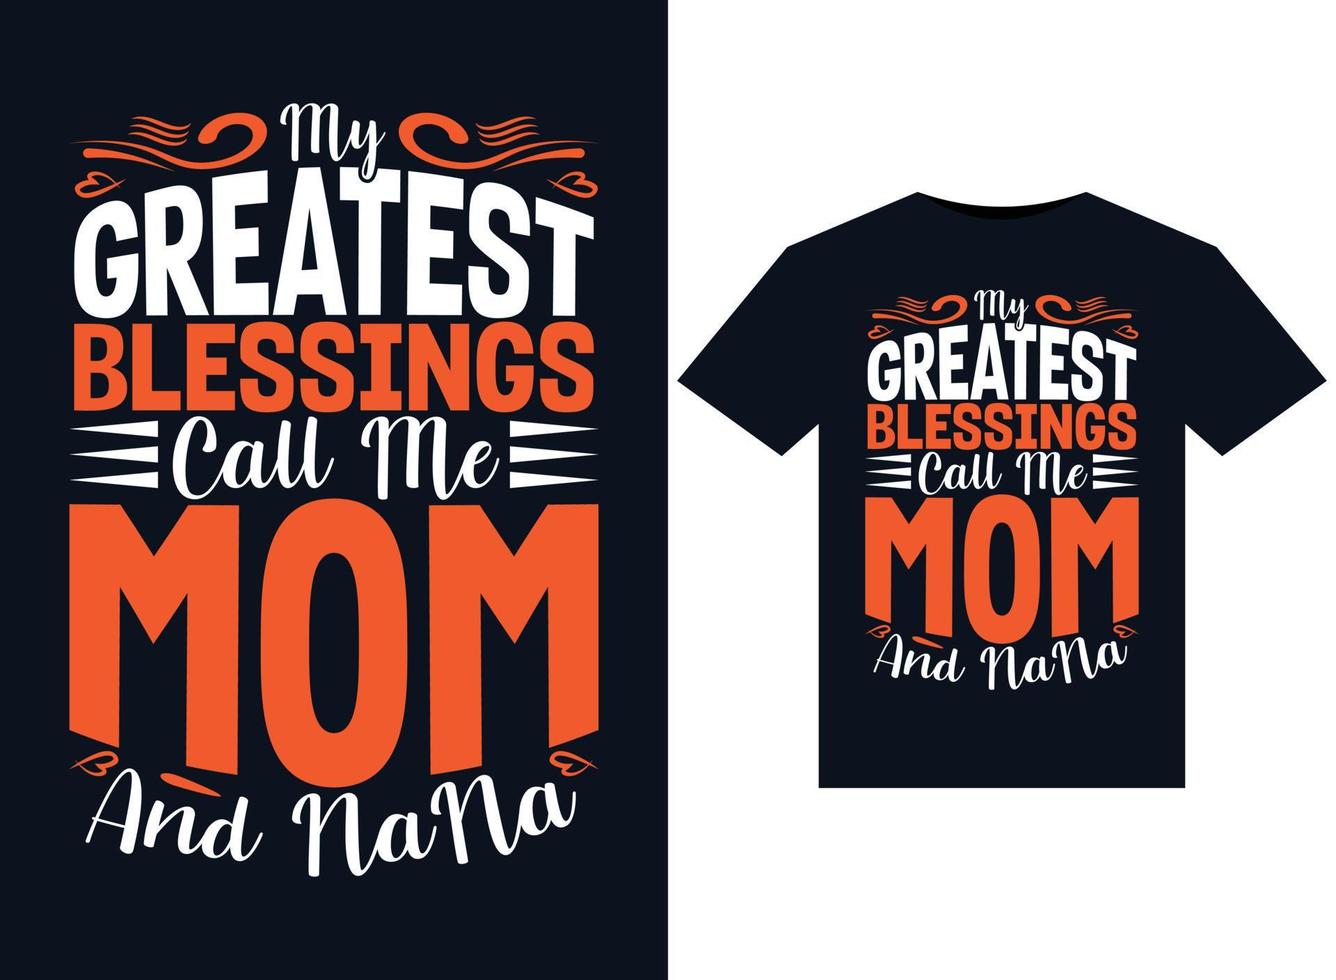 My Greatest Blessings Call Me Mom And NaNa illustrations for print-ready T-Shirts design vector